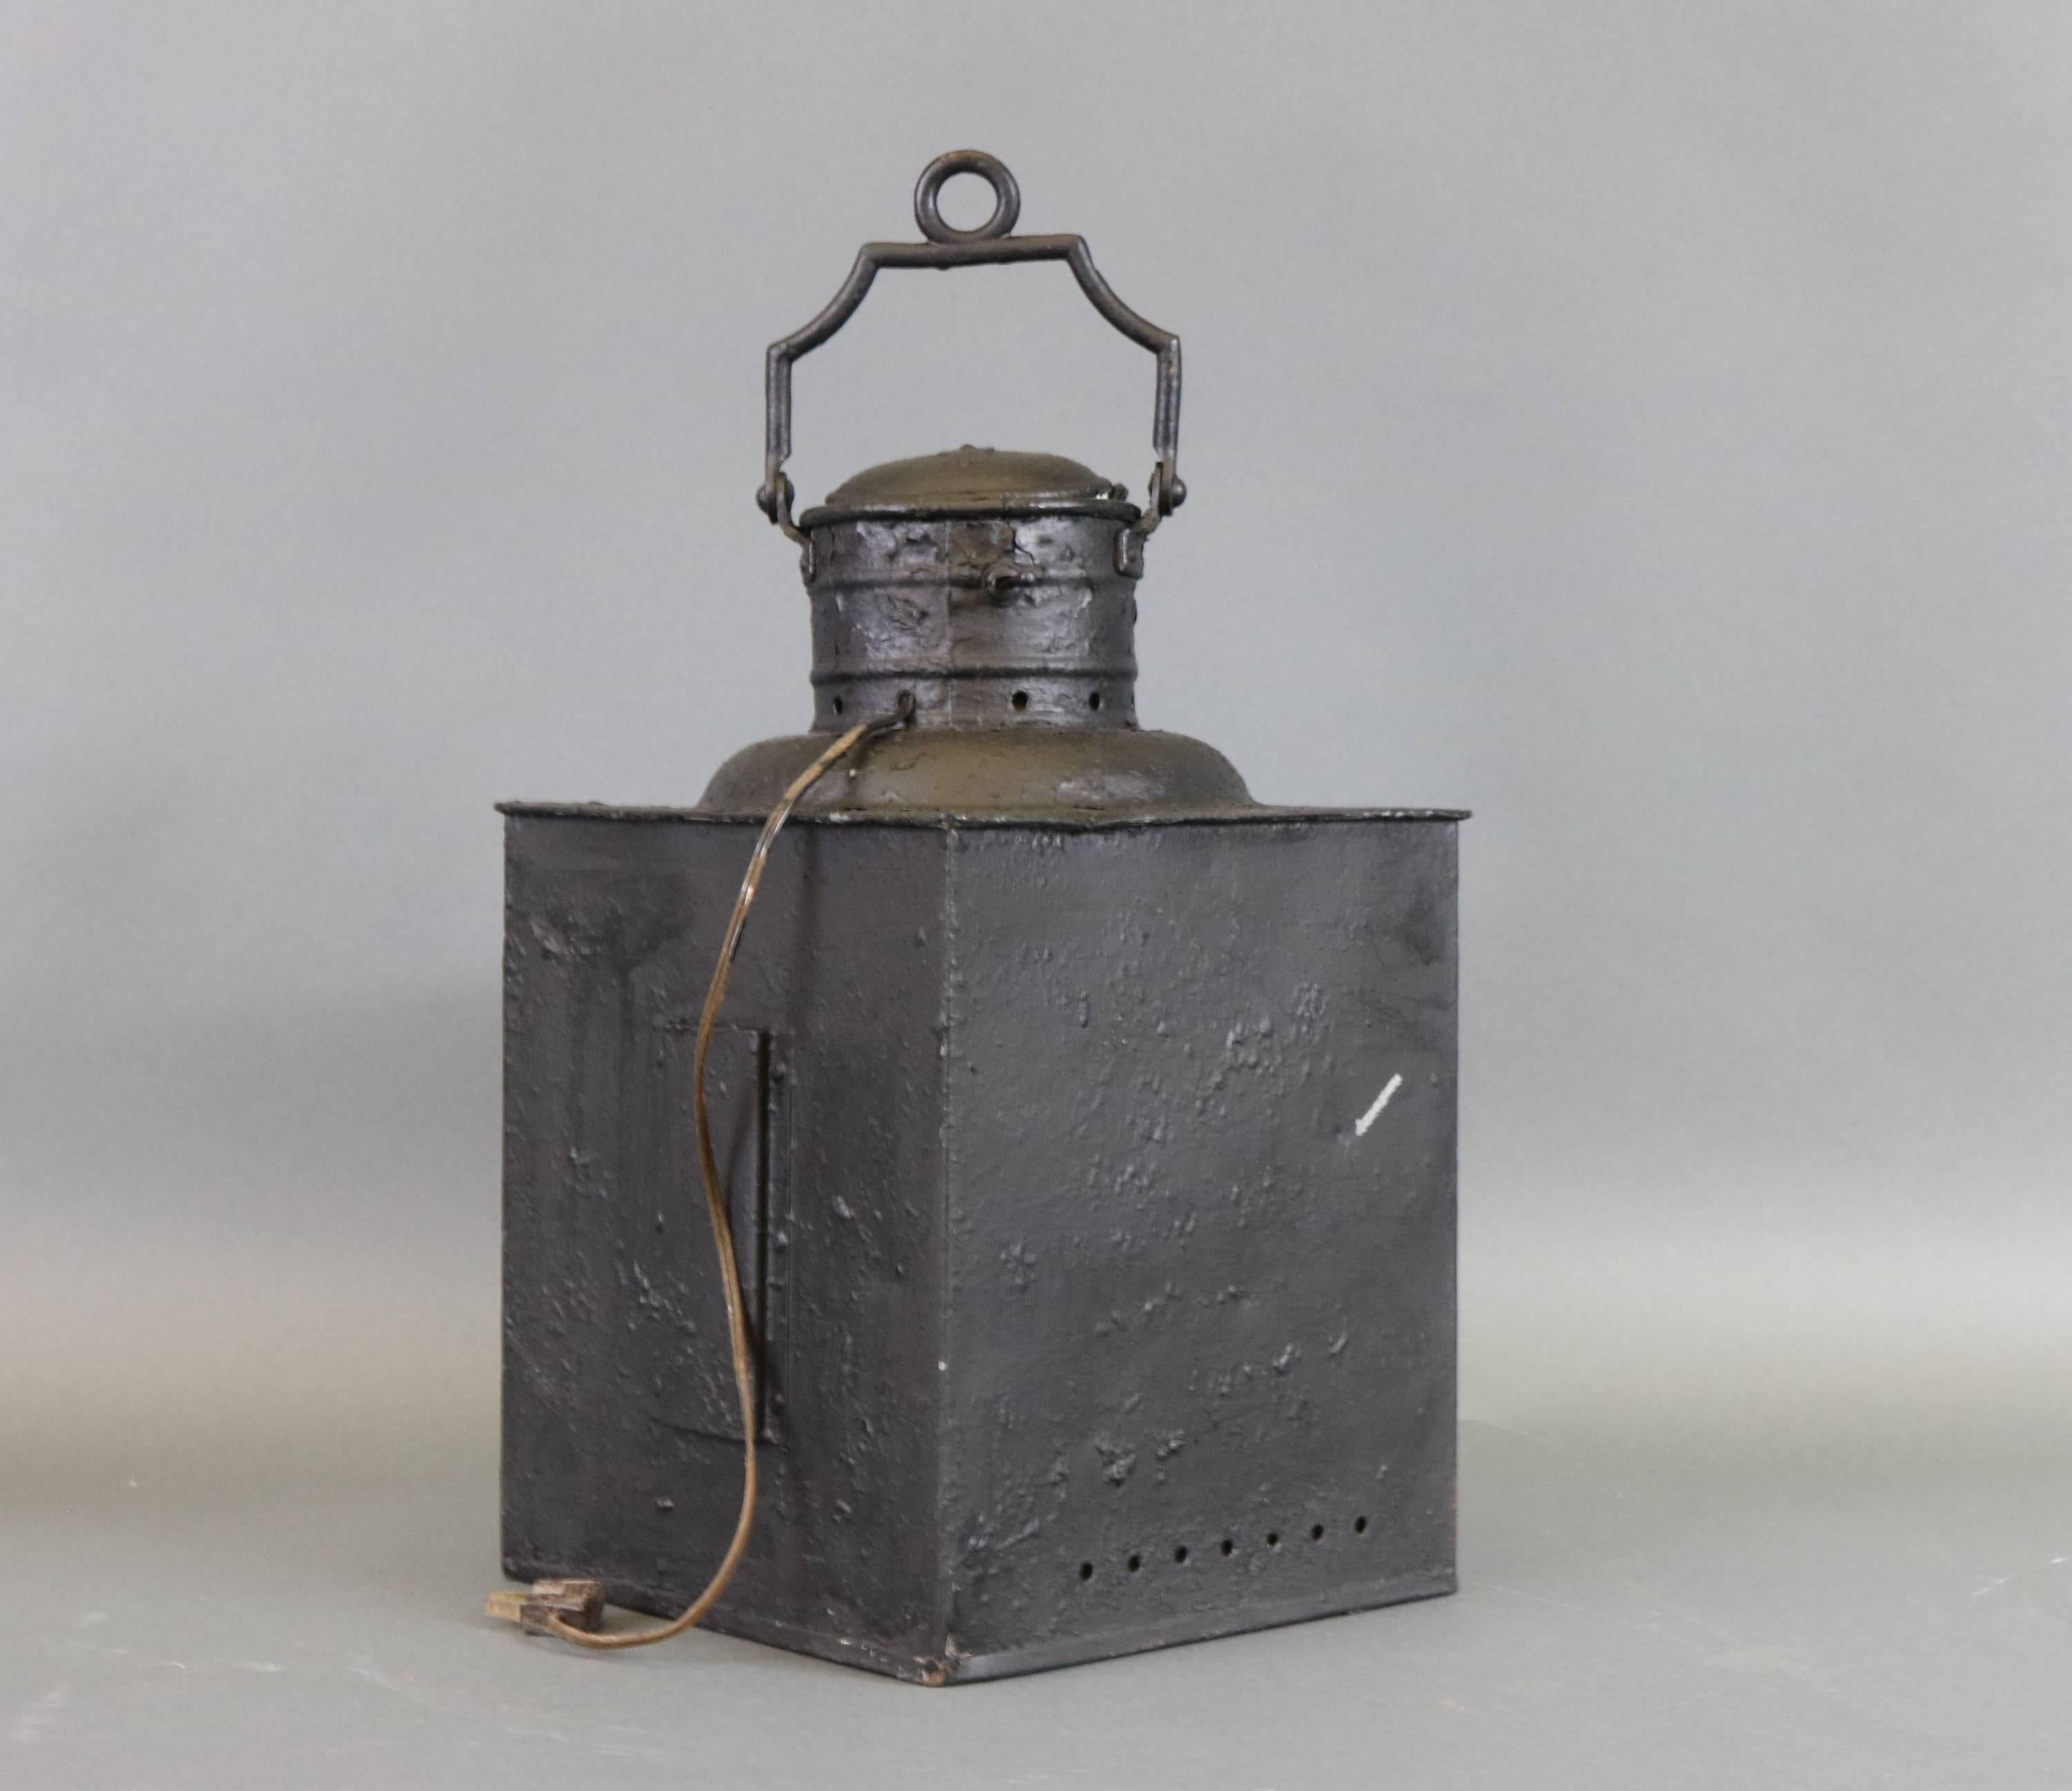 Rich blue starboard ship's lantern with iron case, heavy handle. Electrified.